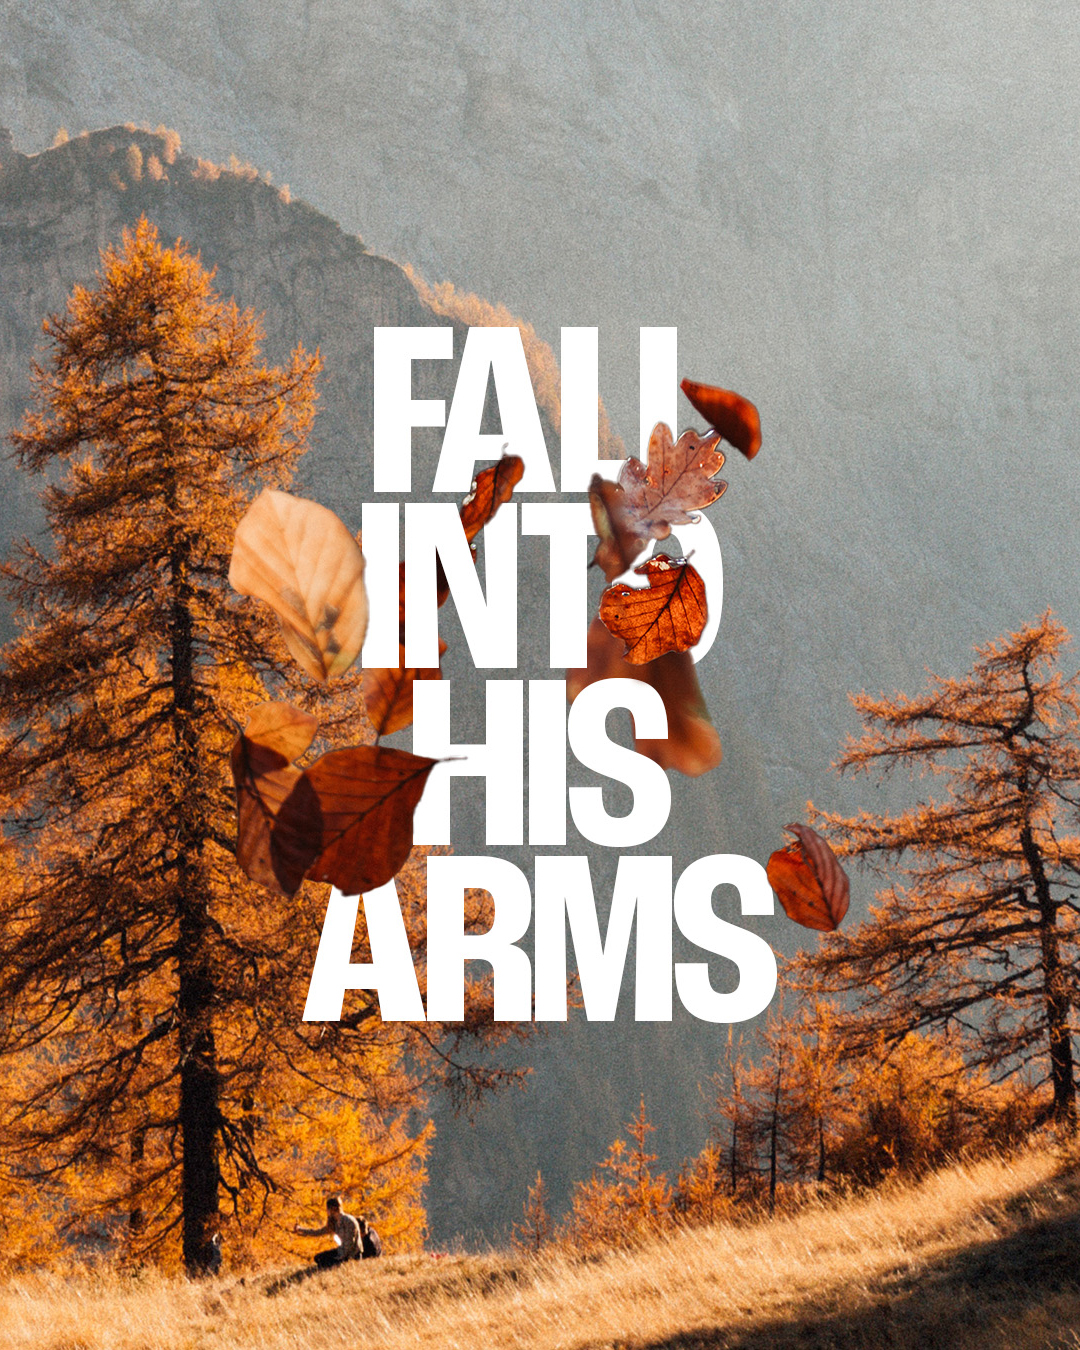 Fall into His arms